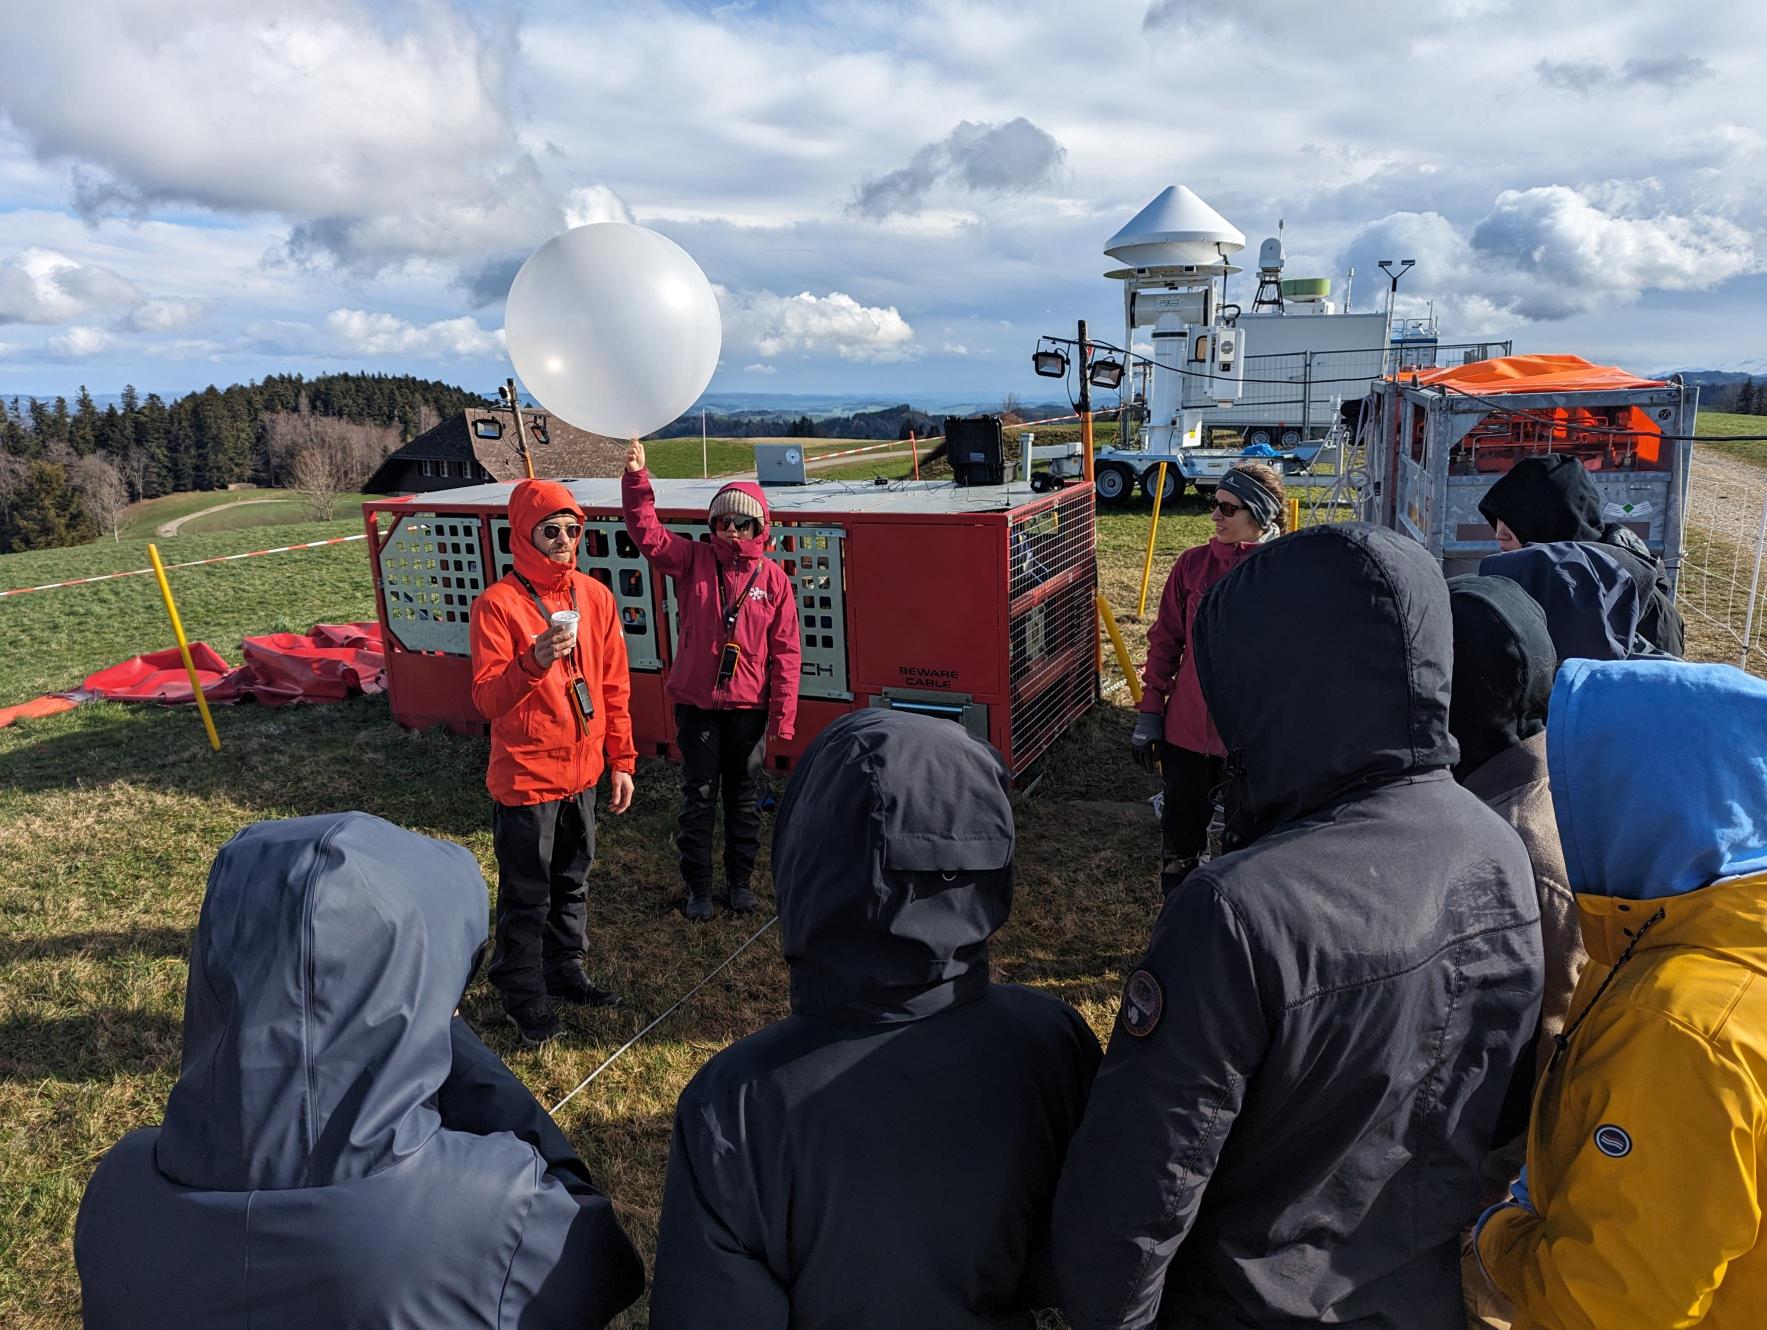 Enlarged view: Launch of radiosonde as example of field work for the students.